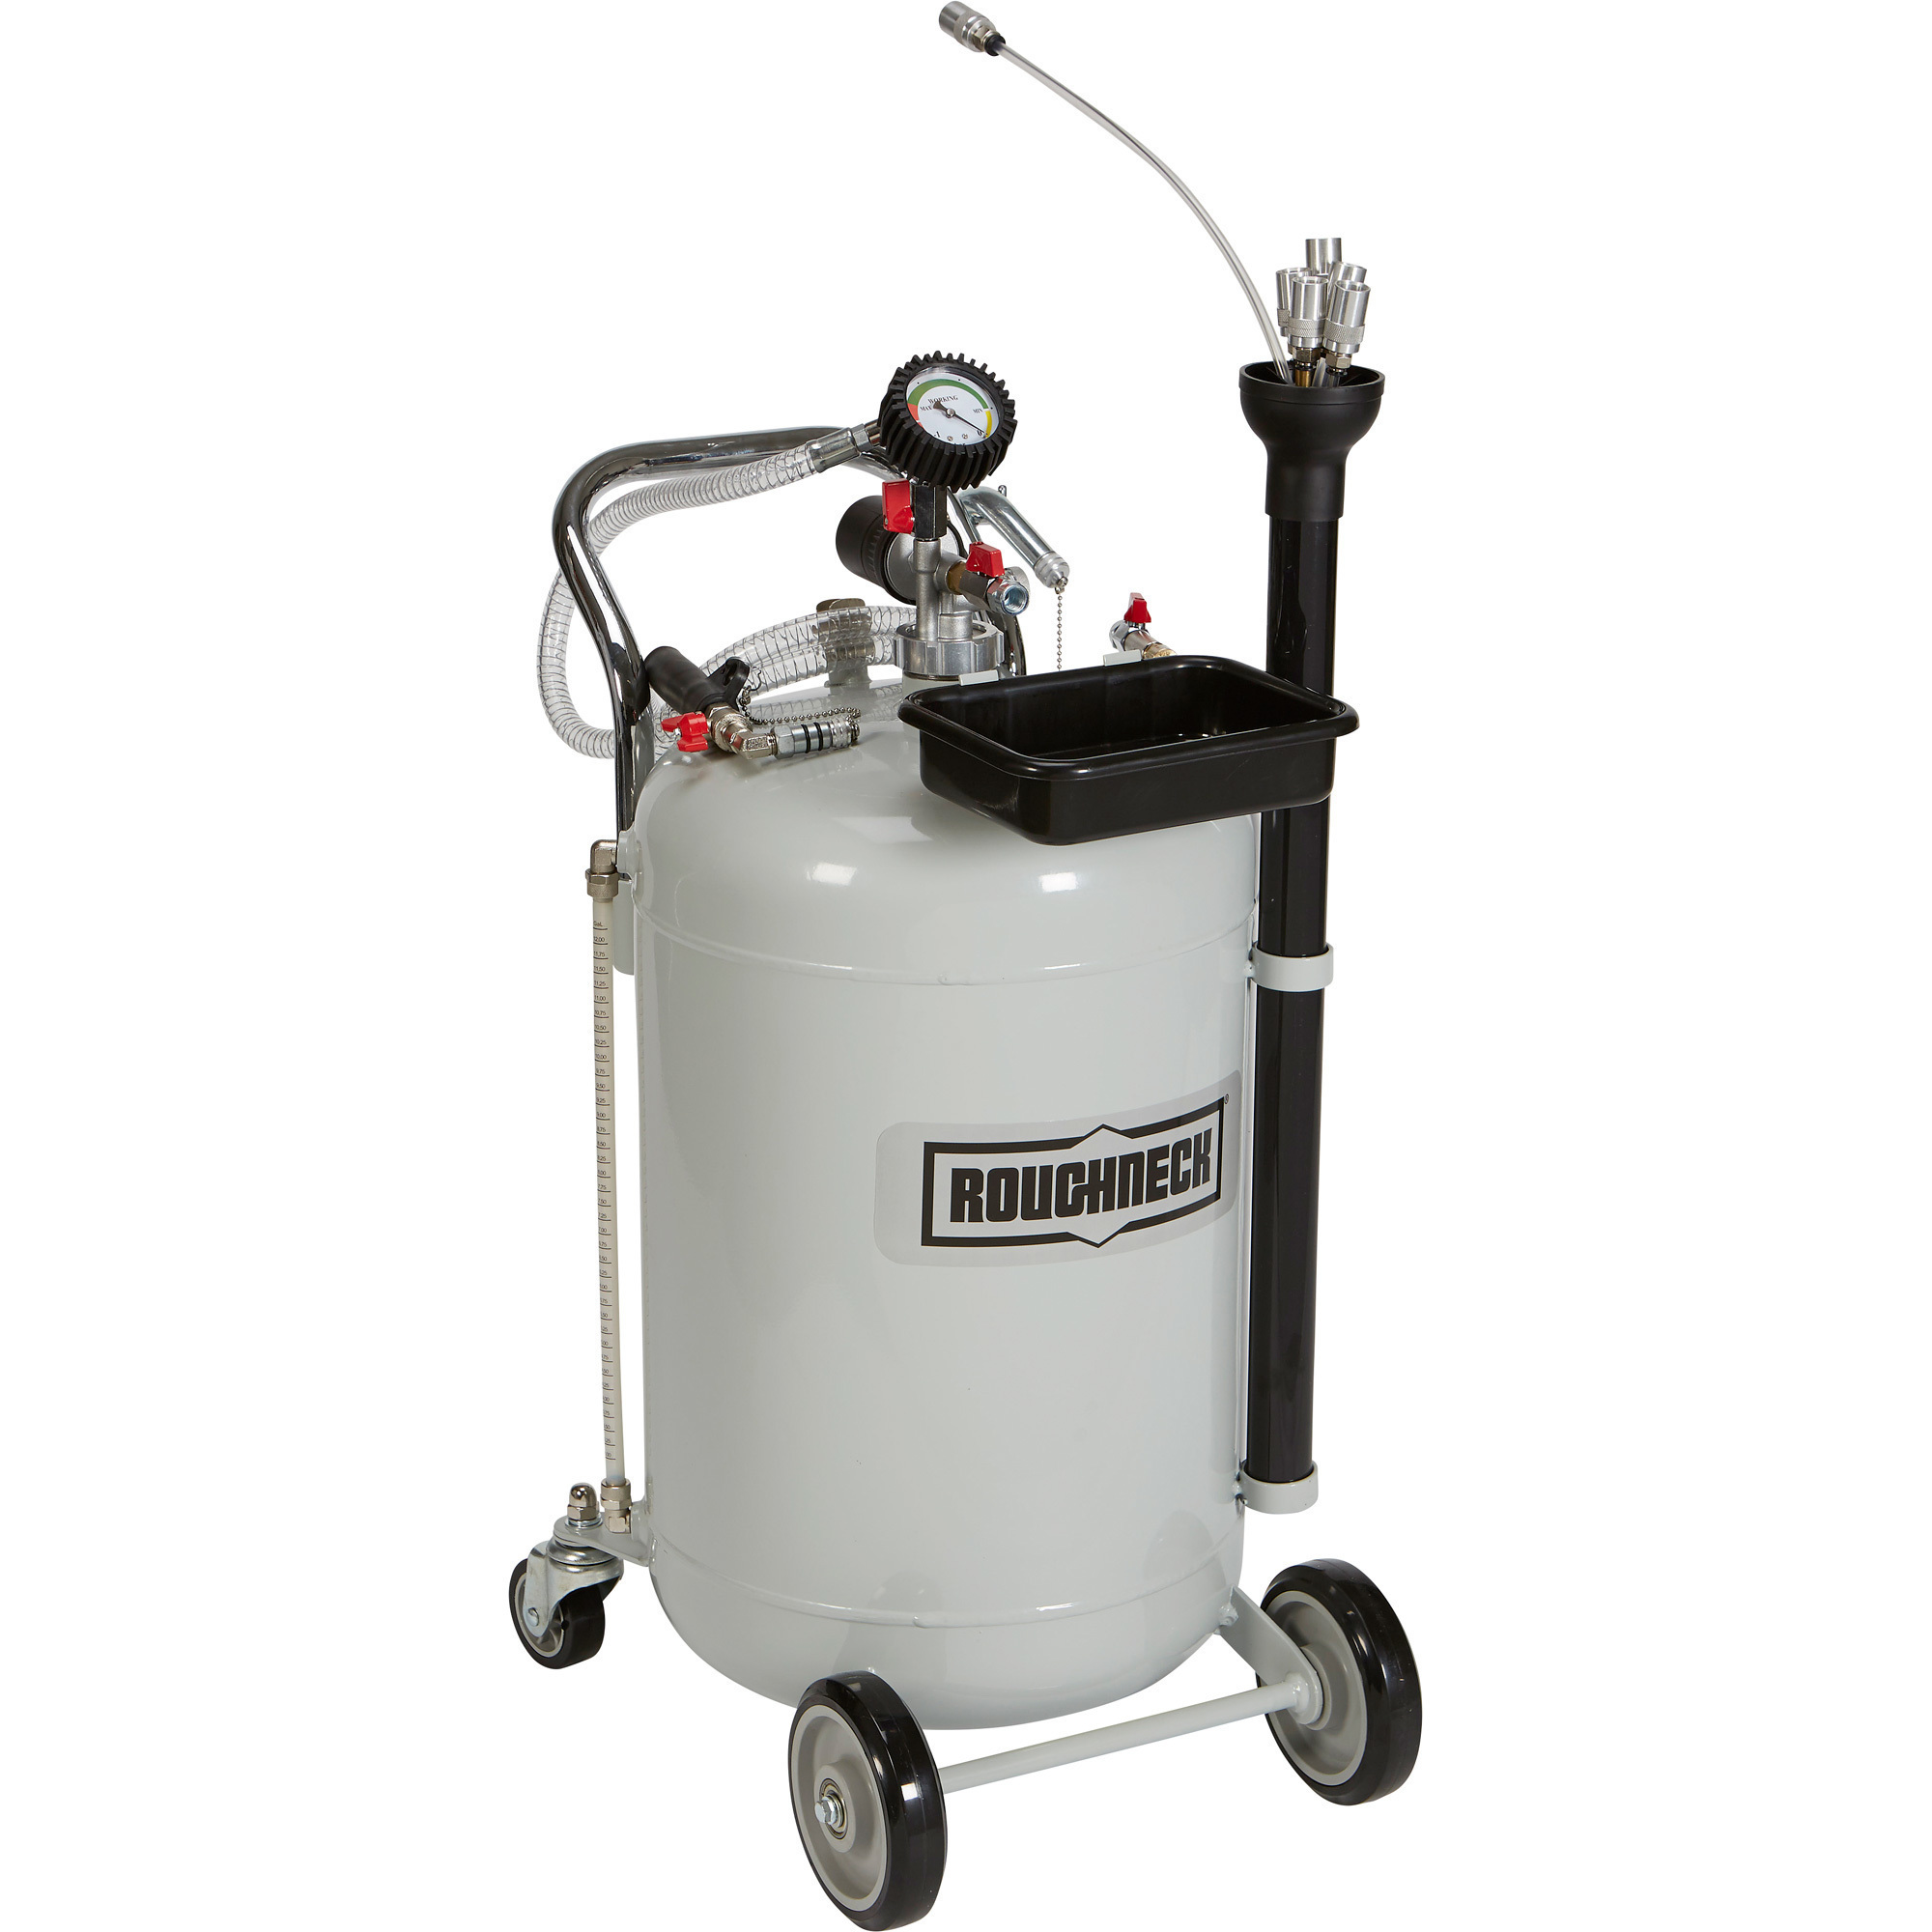 Roughneck Air-Operated Waste Oil Changer, 17-Gallon Tank